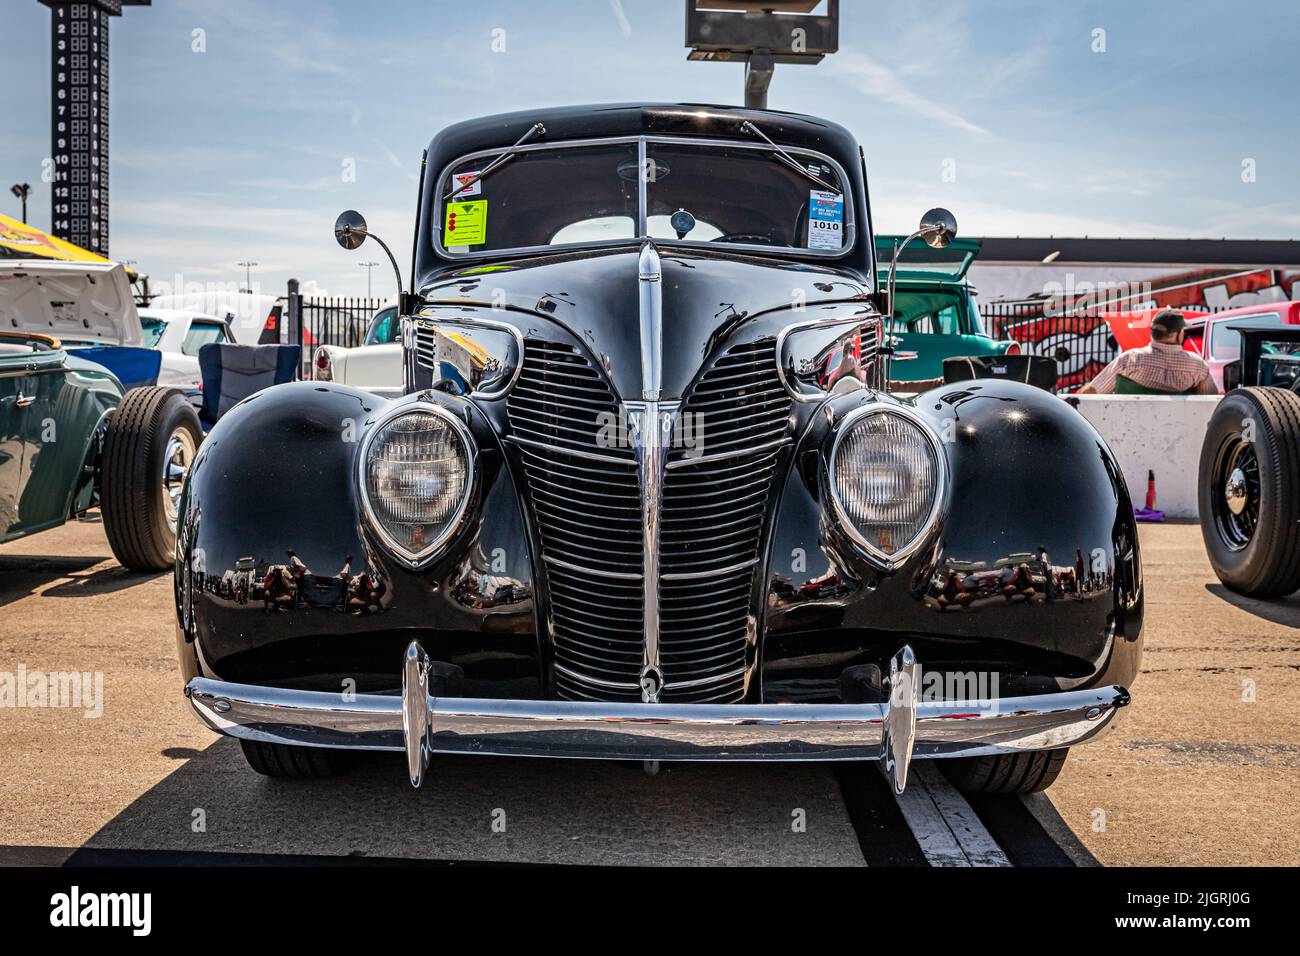 Lebanon, TN - May 14, 2022: Low perspective front view of a 1939 Ford Standard Tudor Sedan at a local car show. Stock Photo